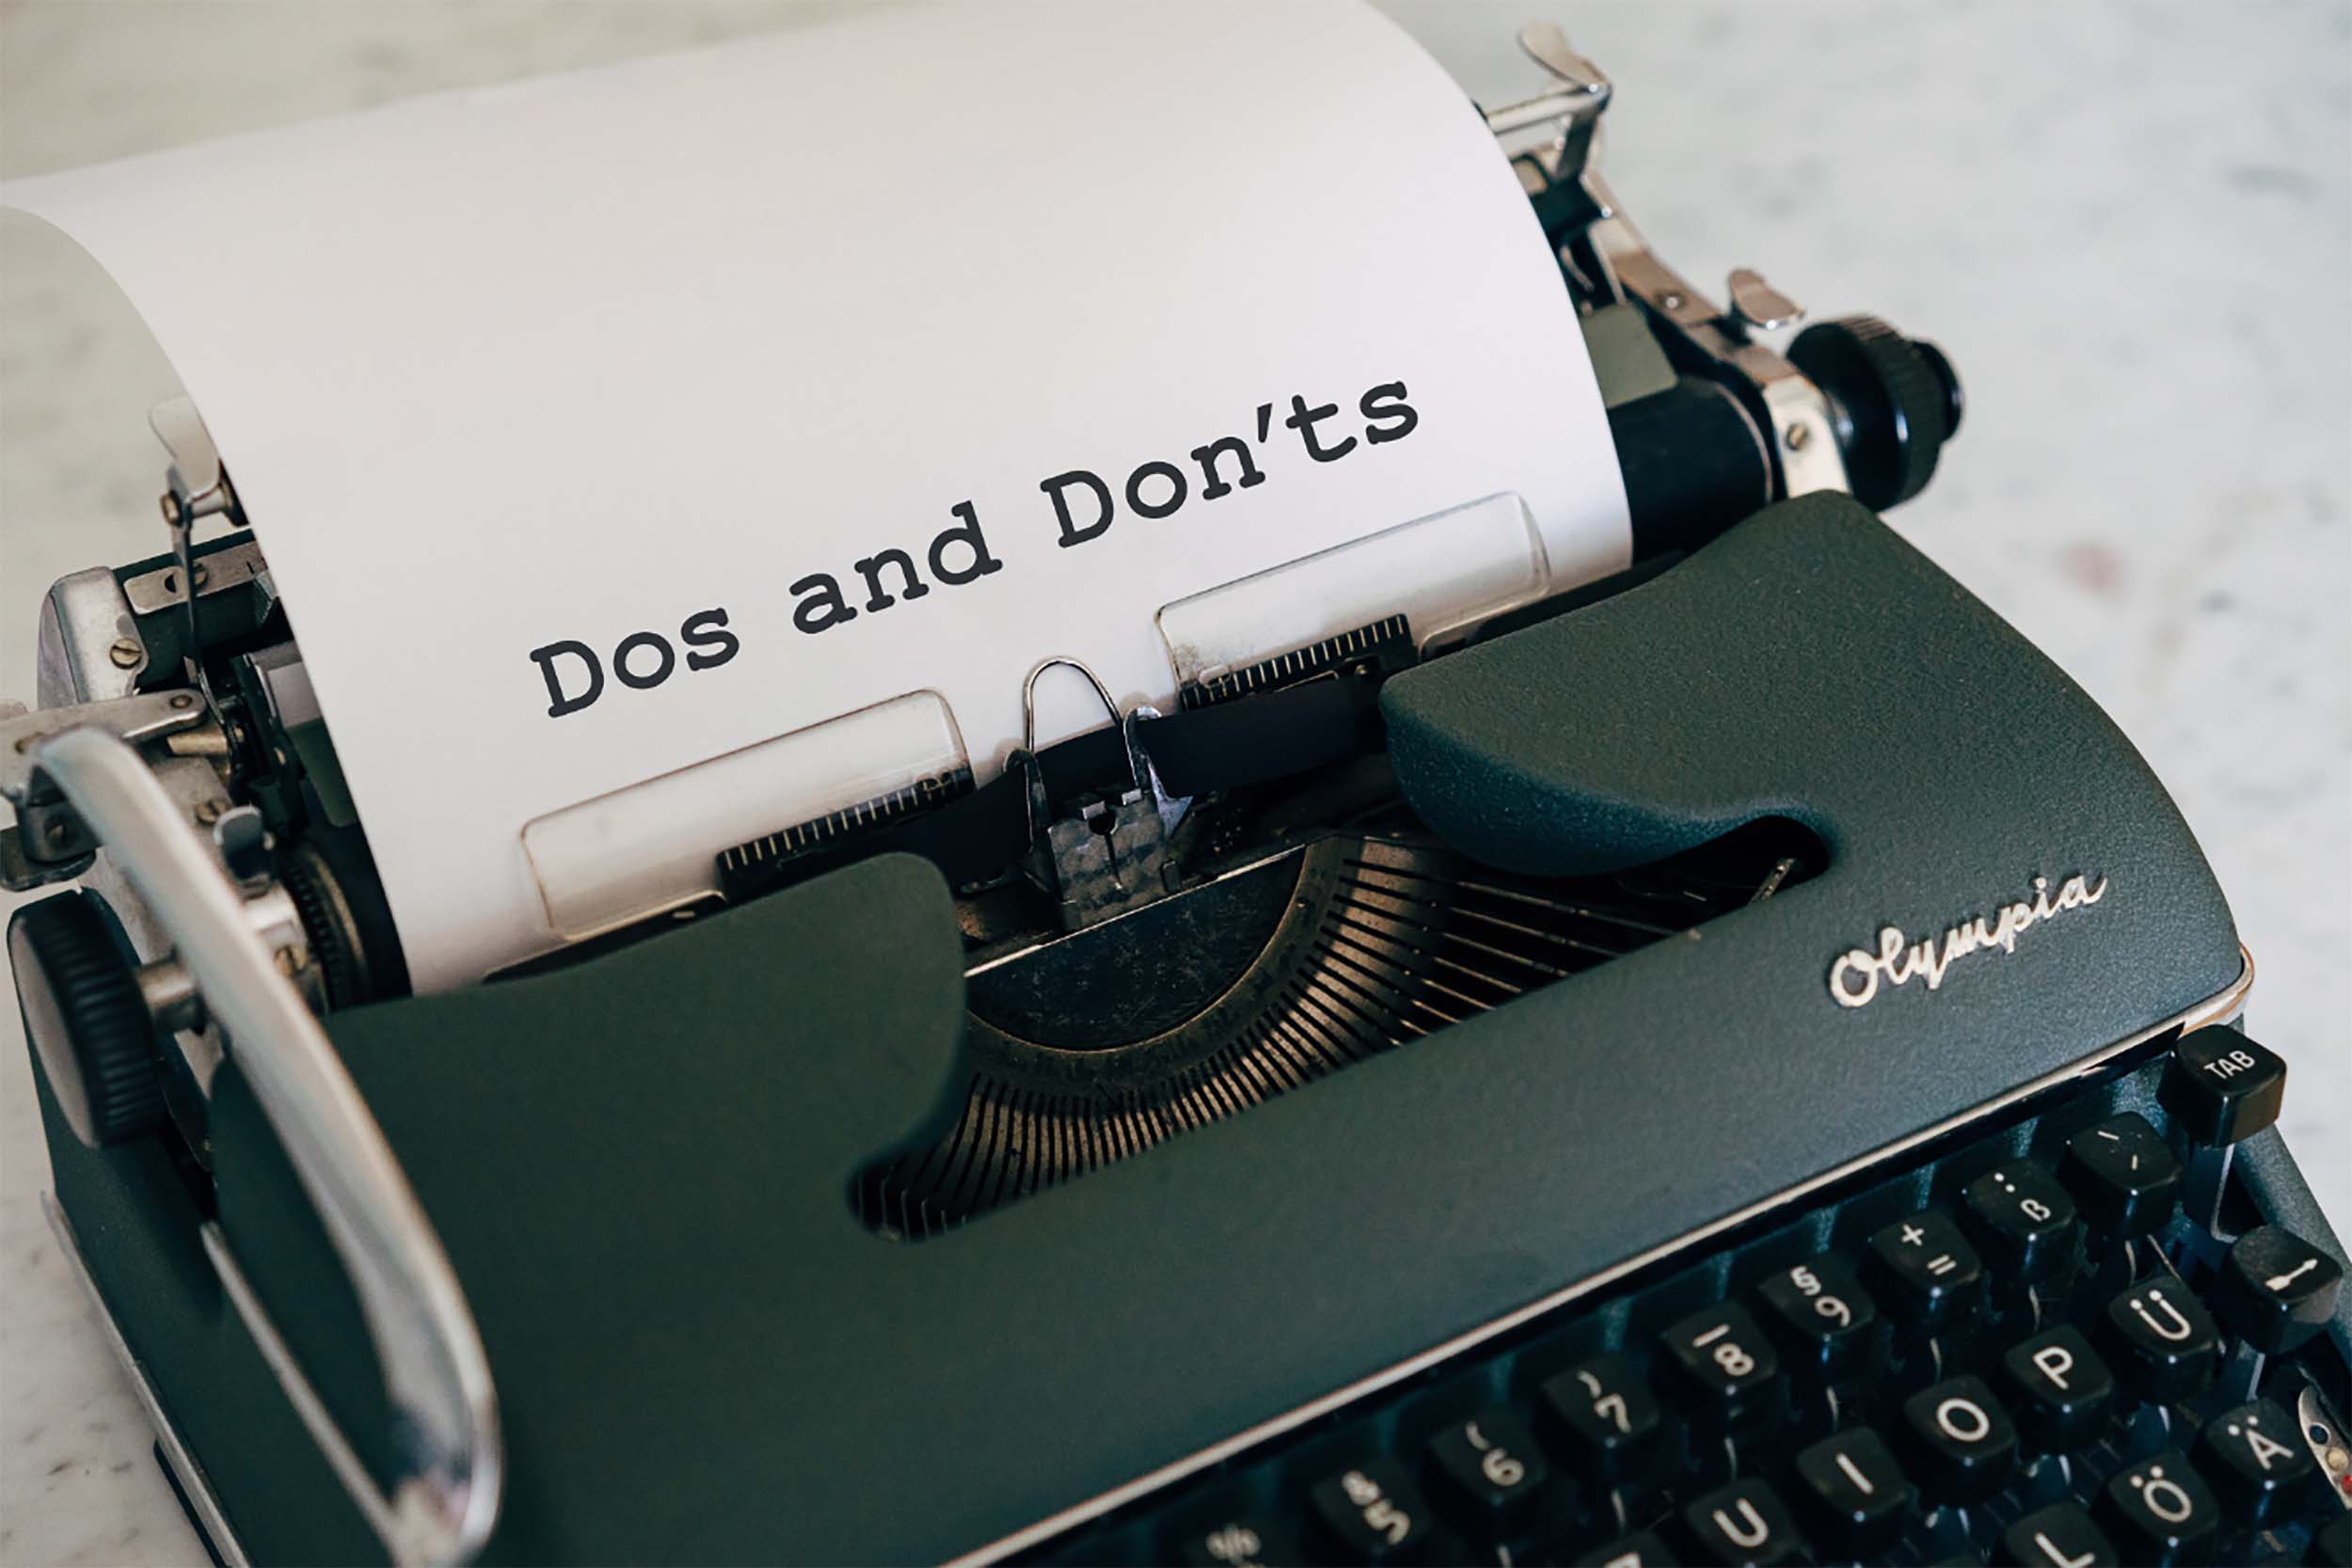 Typewriter with Do's and Don'ts title typed out on a piece of paper